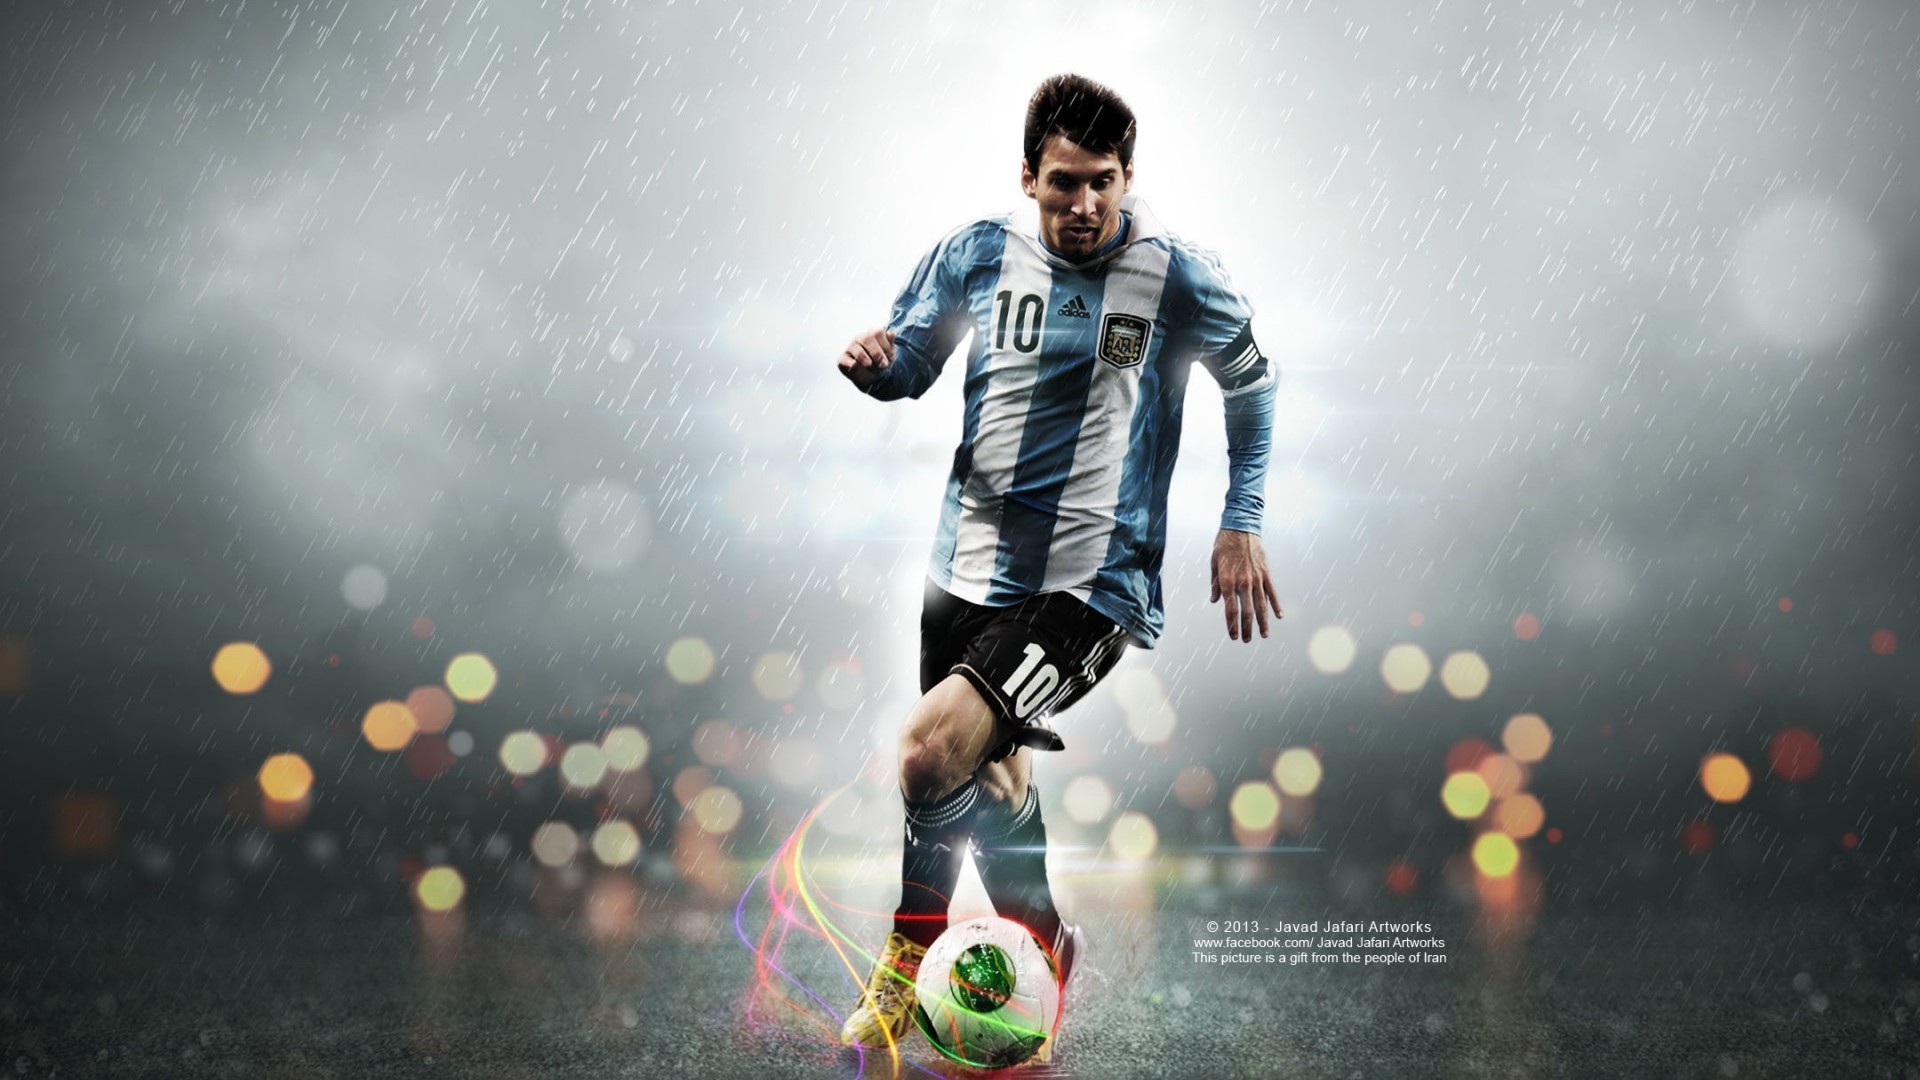 1920x1080 Football Wallpapers Free Download HD New Latest Sports Player Images  1920Ã1080